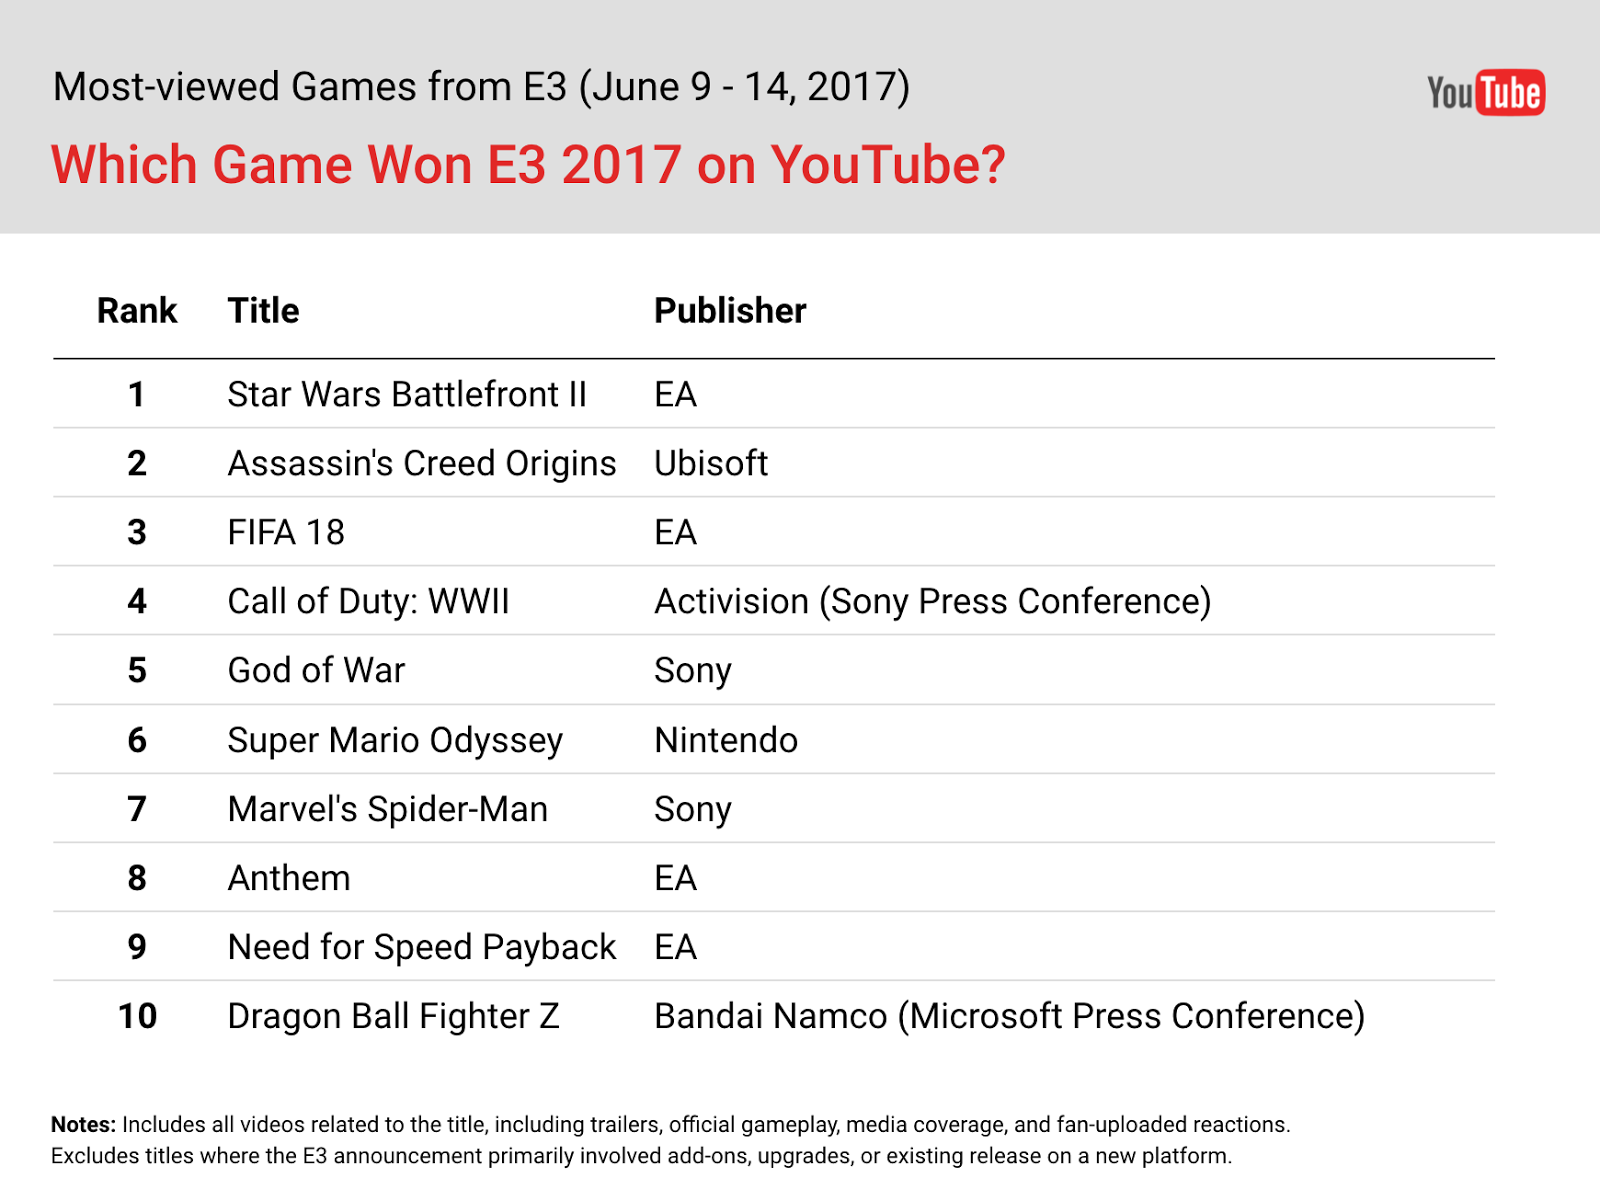 Battlefront 2 is most viewed 